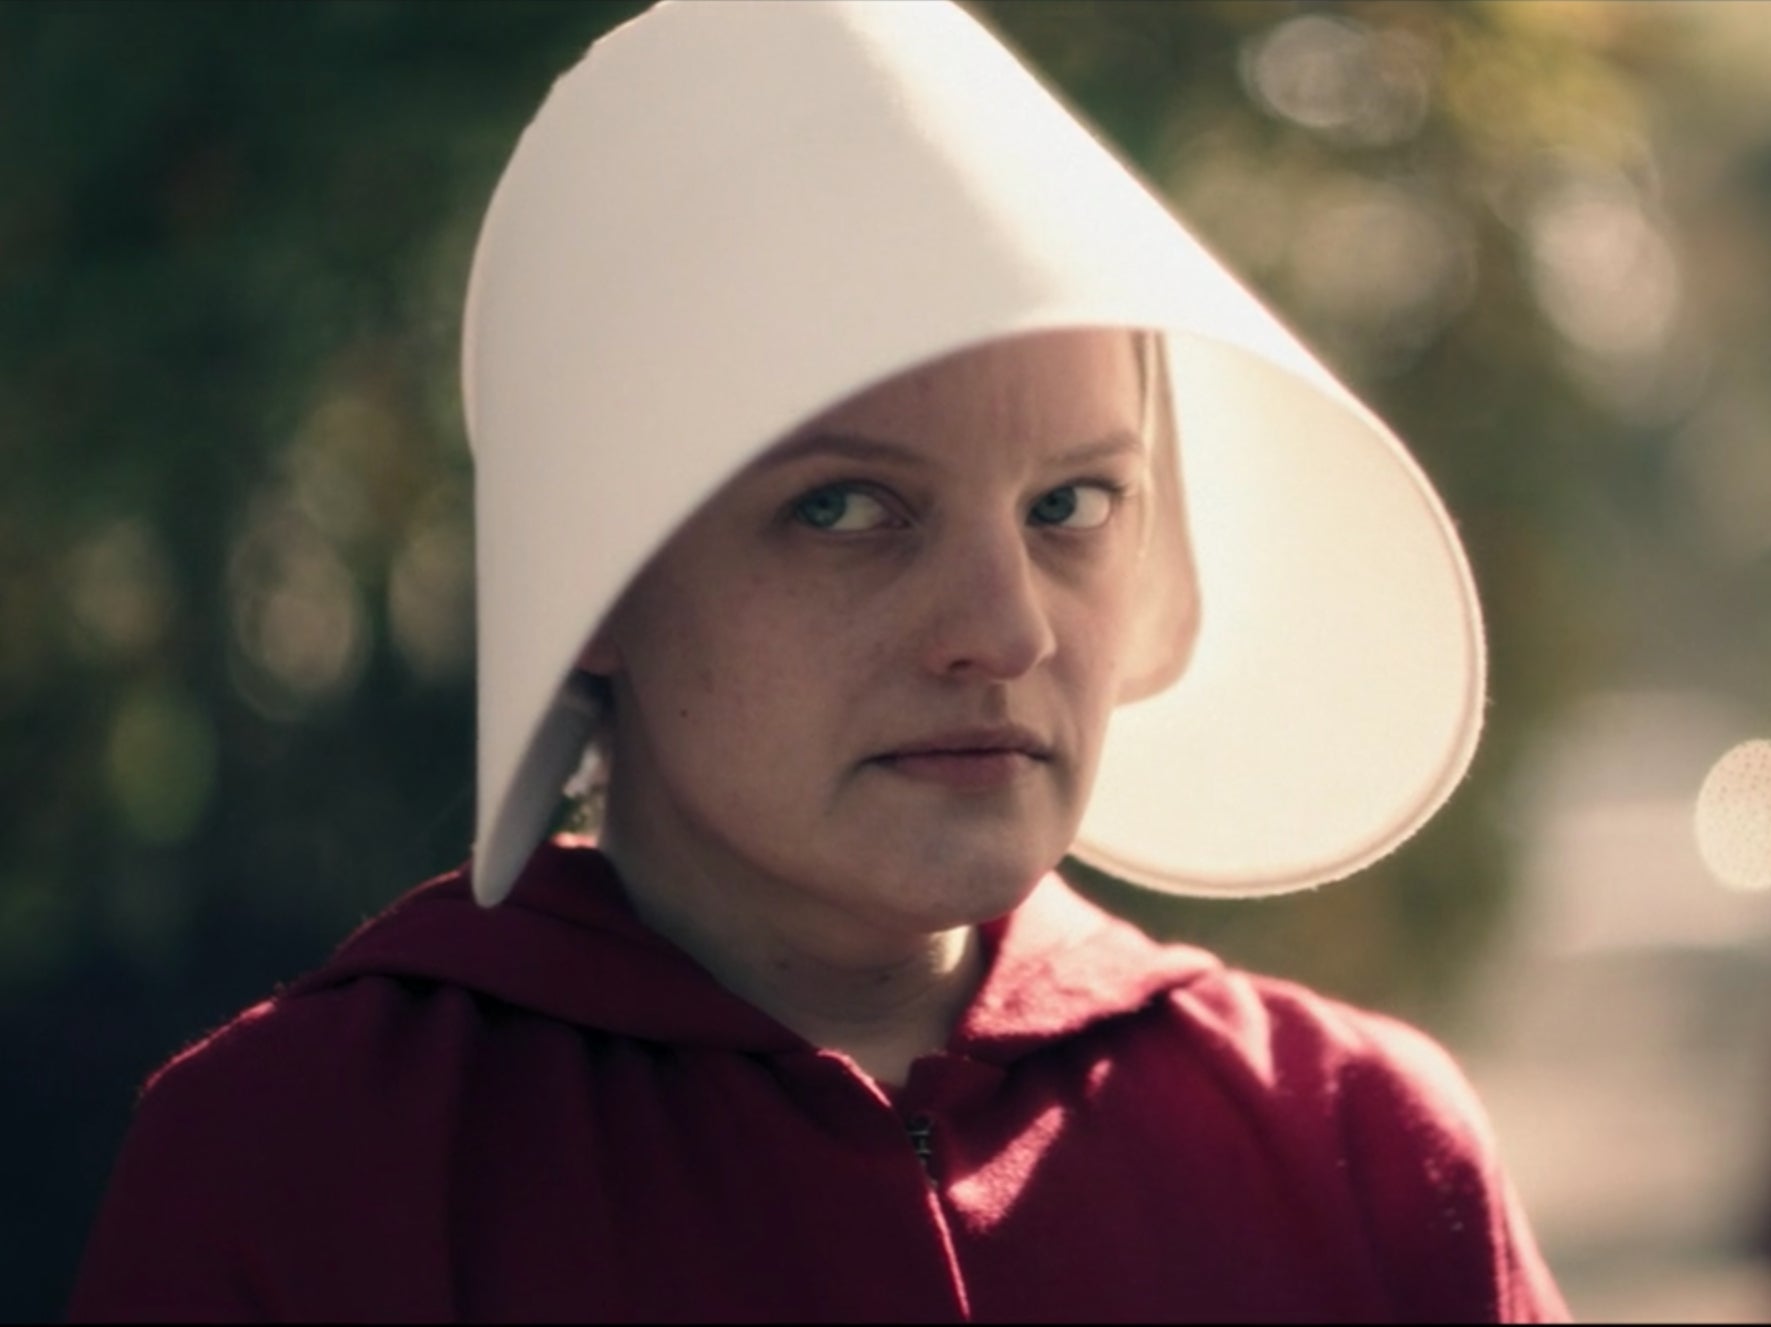 Actor Elisabeth Moss in the TV adaptation of Atwood’s ‘The Handmaid’s Tale’